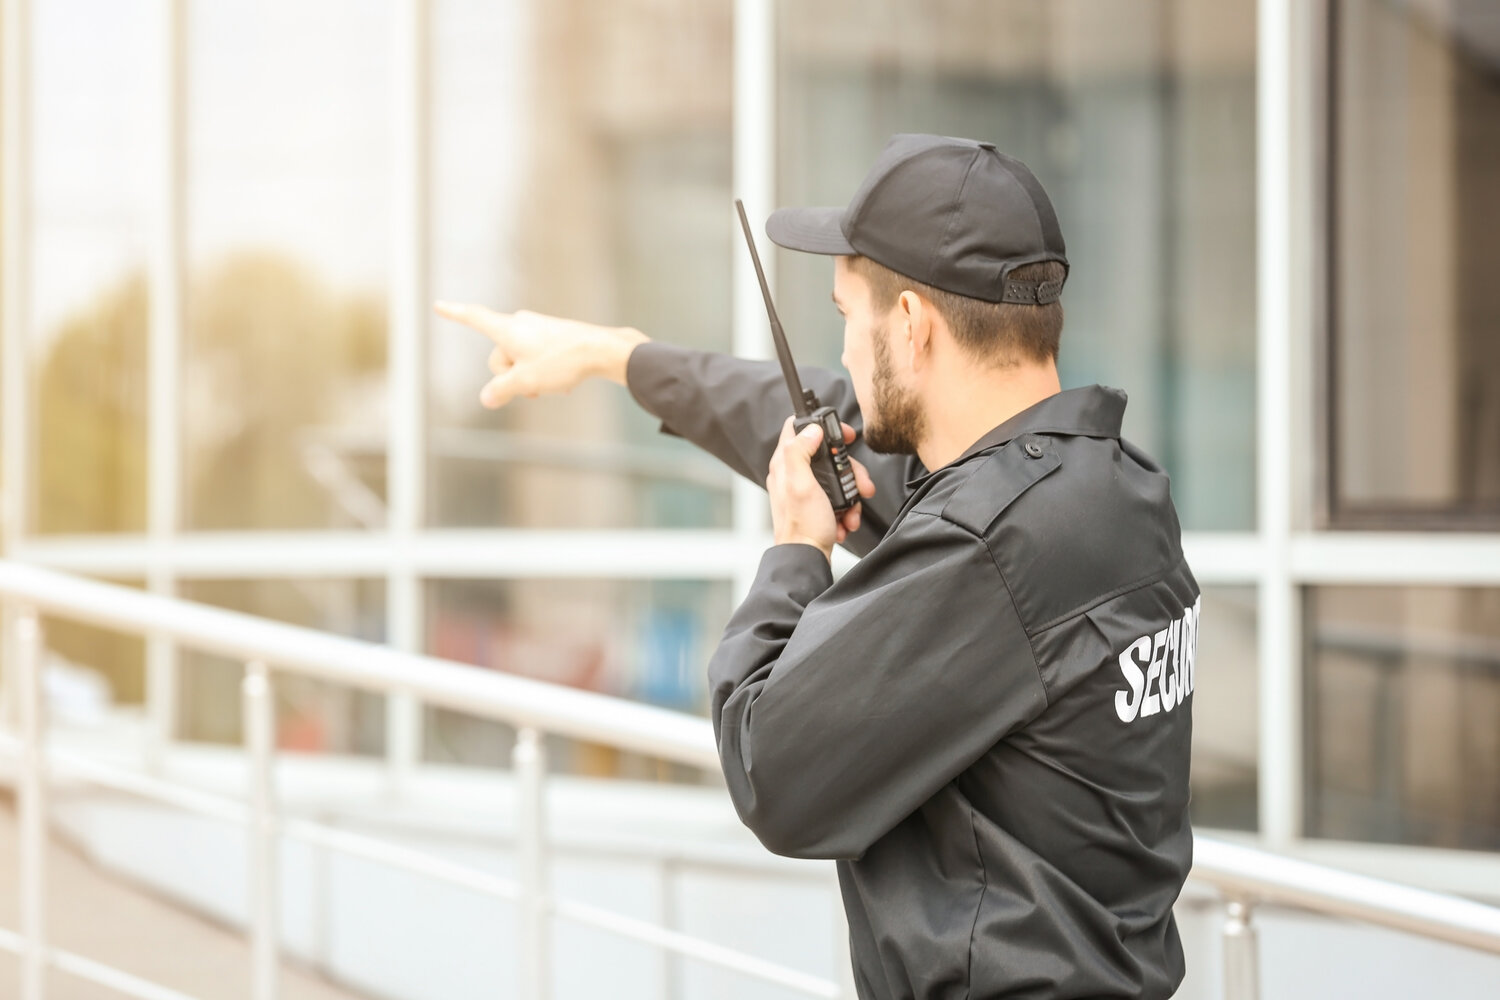 Hire Security Guard Services | Armed Security Guard Service – Guard Services  USA